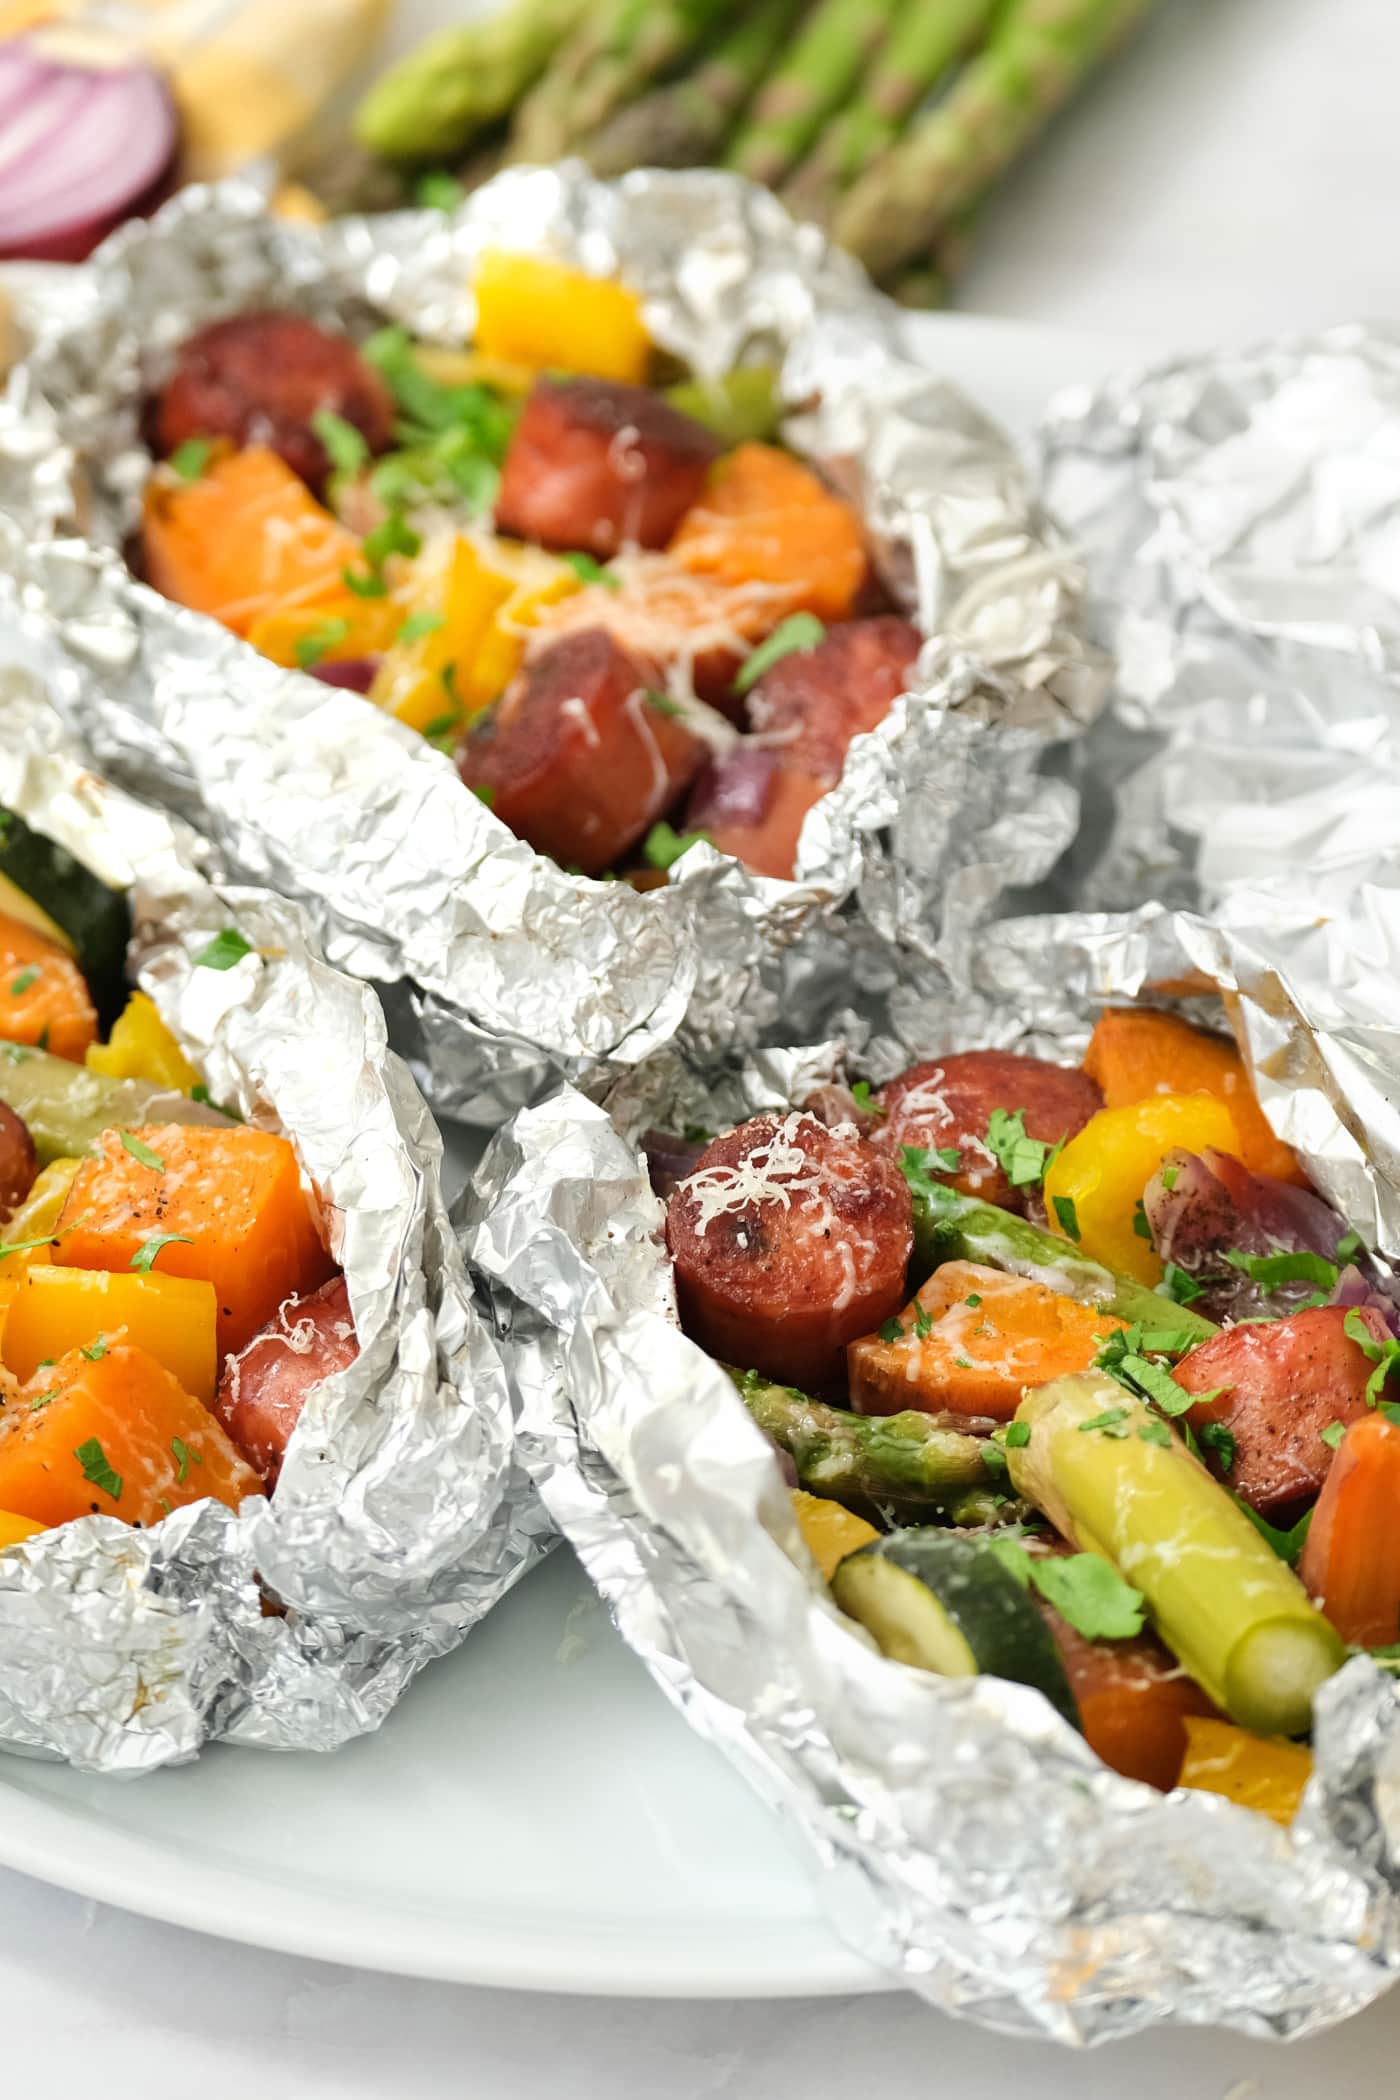 Make Ahead Chicken Foil Dinner For Camping or Grilling at Home - An Oregon  Cottage